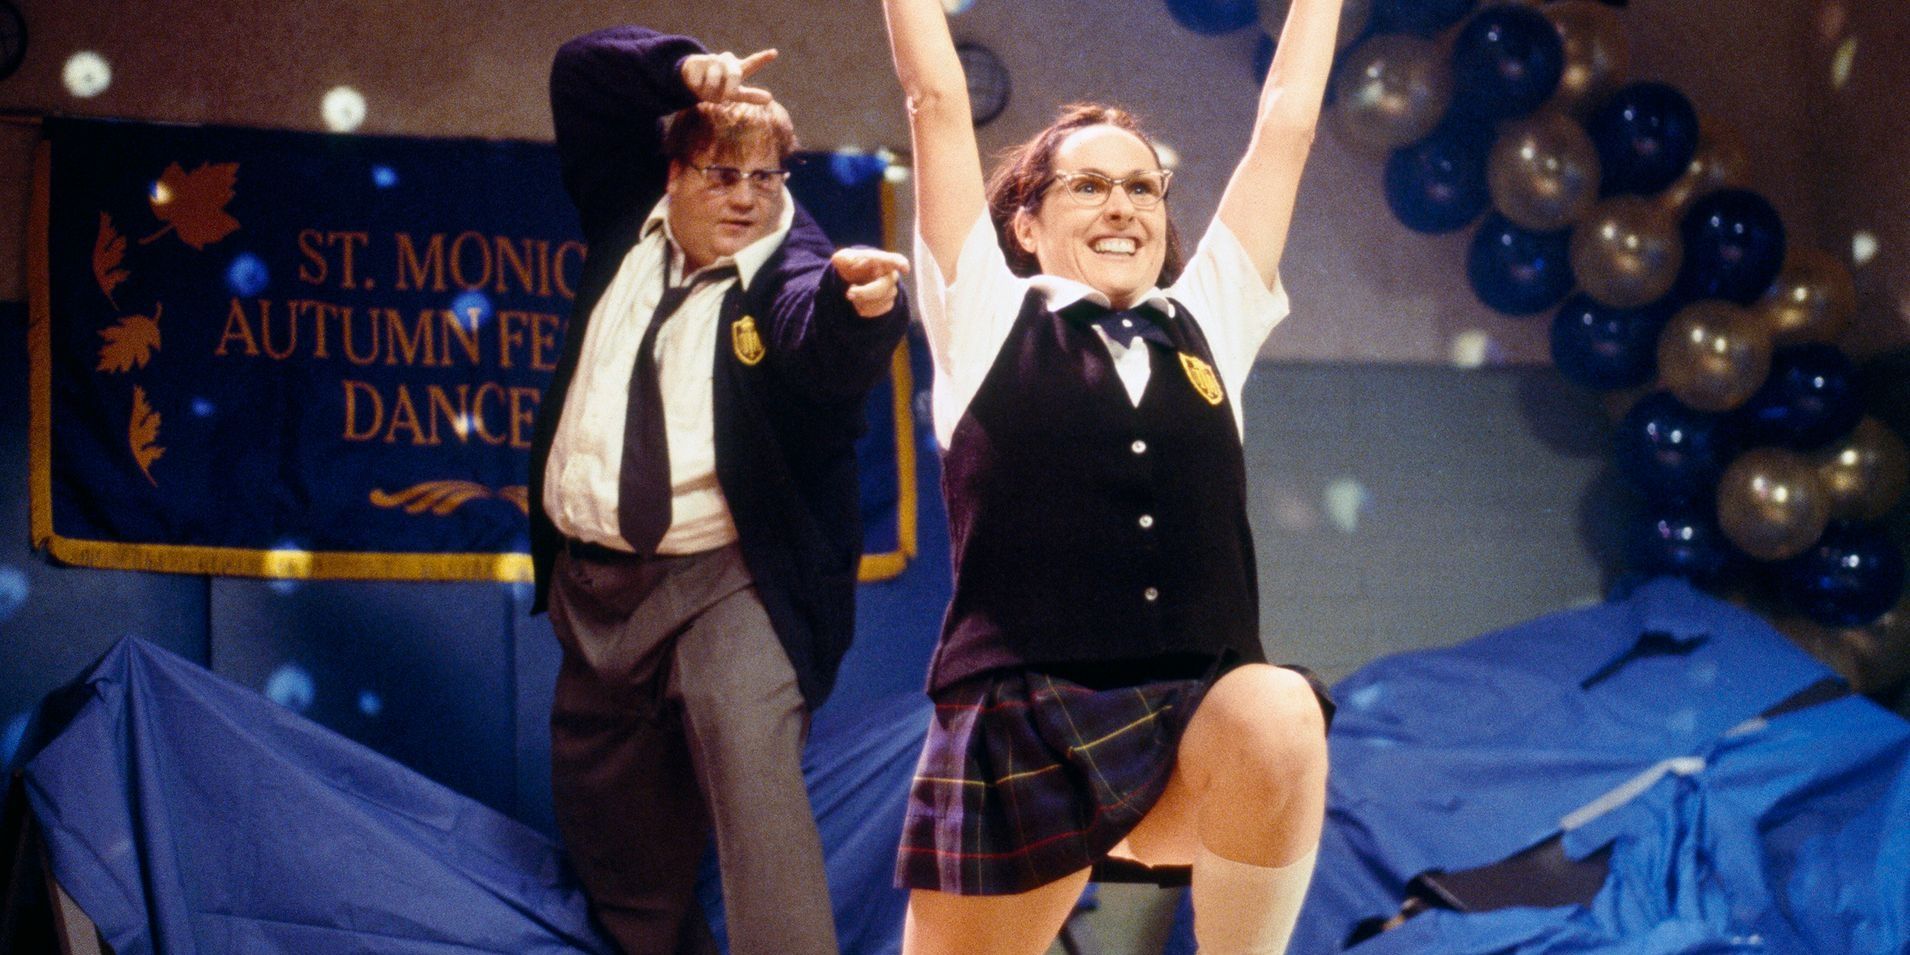 Molly Shannon as Mary Katherine Gallagher in Superstar